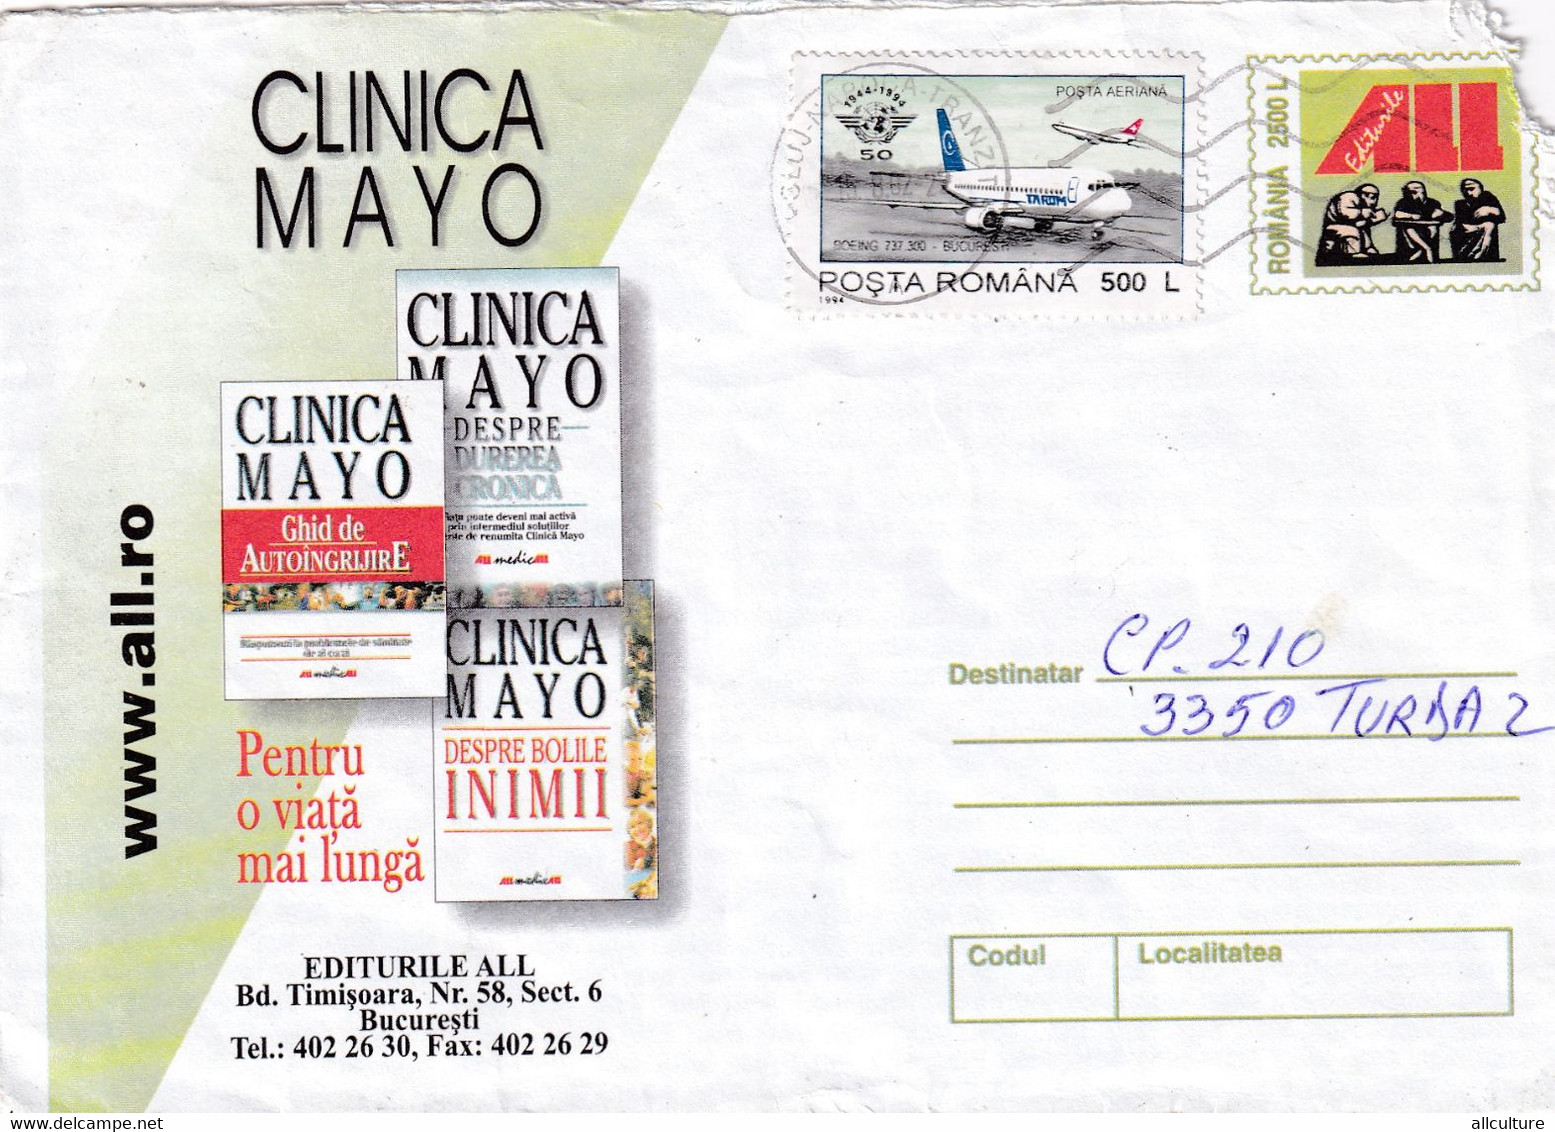 A9639 - MAYO CLINIC MEDICINE - FOR A LONG LIFE, ROMANIAN POSTAGE USED STAMP ON COVER, CLUJ 2002 ROMANIA COVER STATIONERY - Medicina